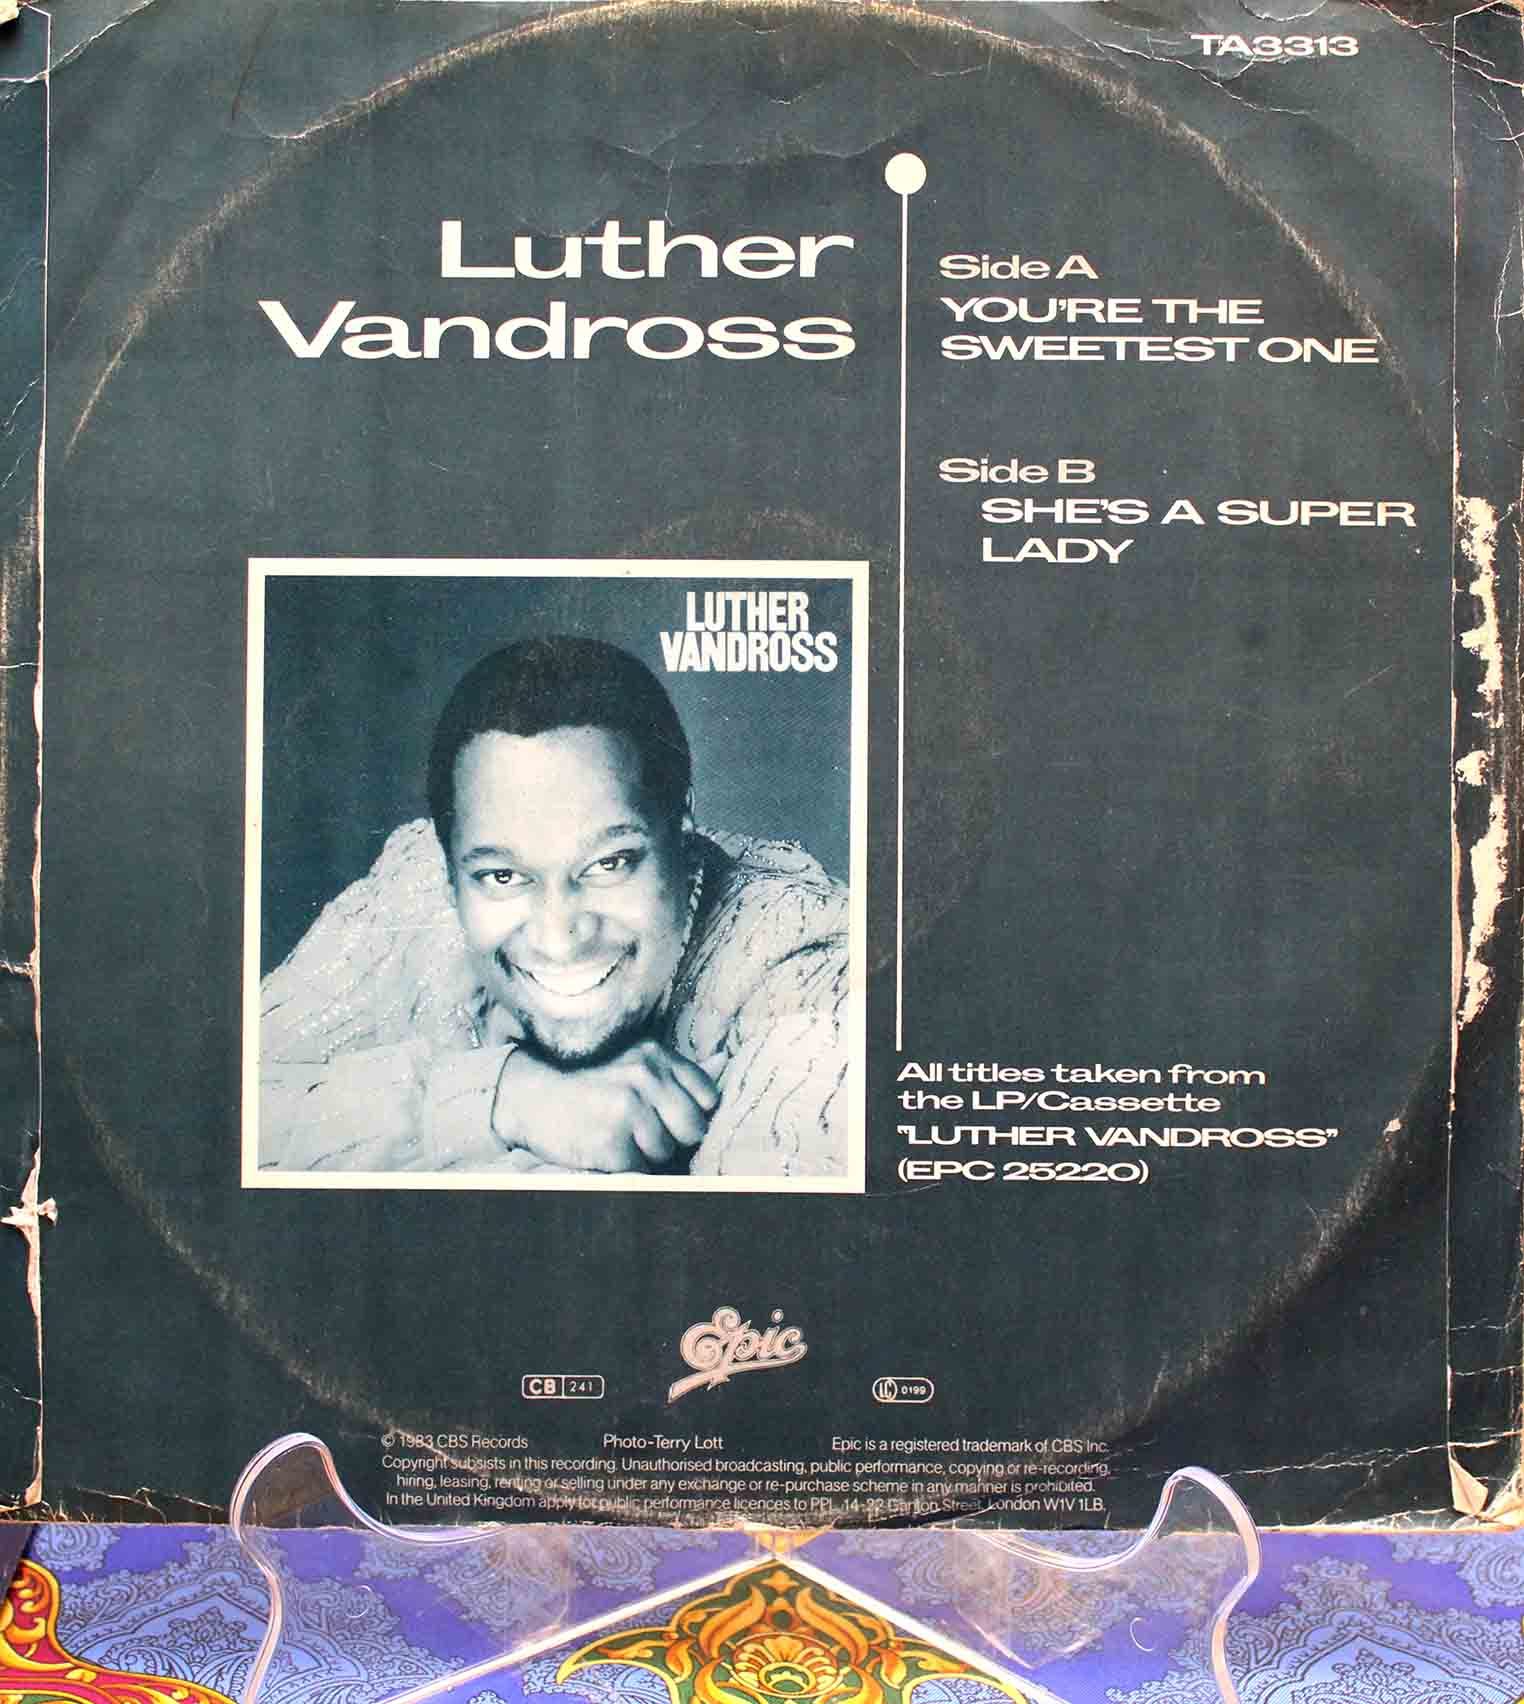 Luther Vandross super lady 02